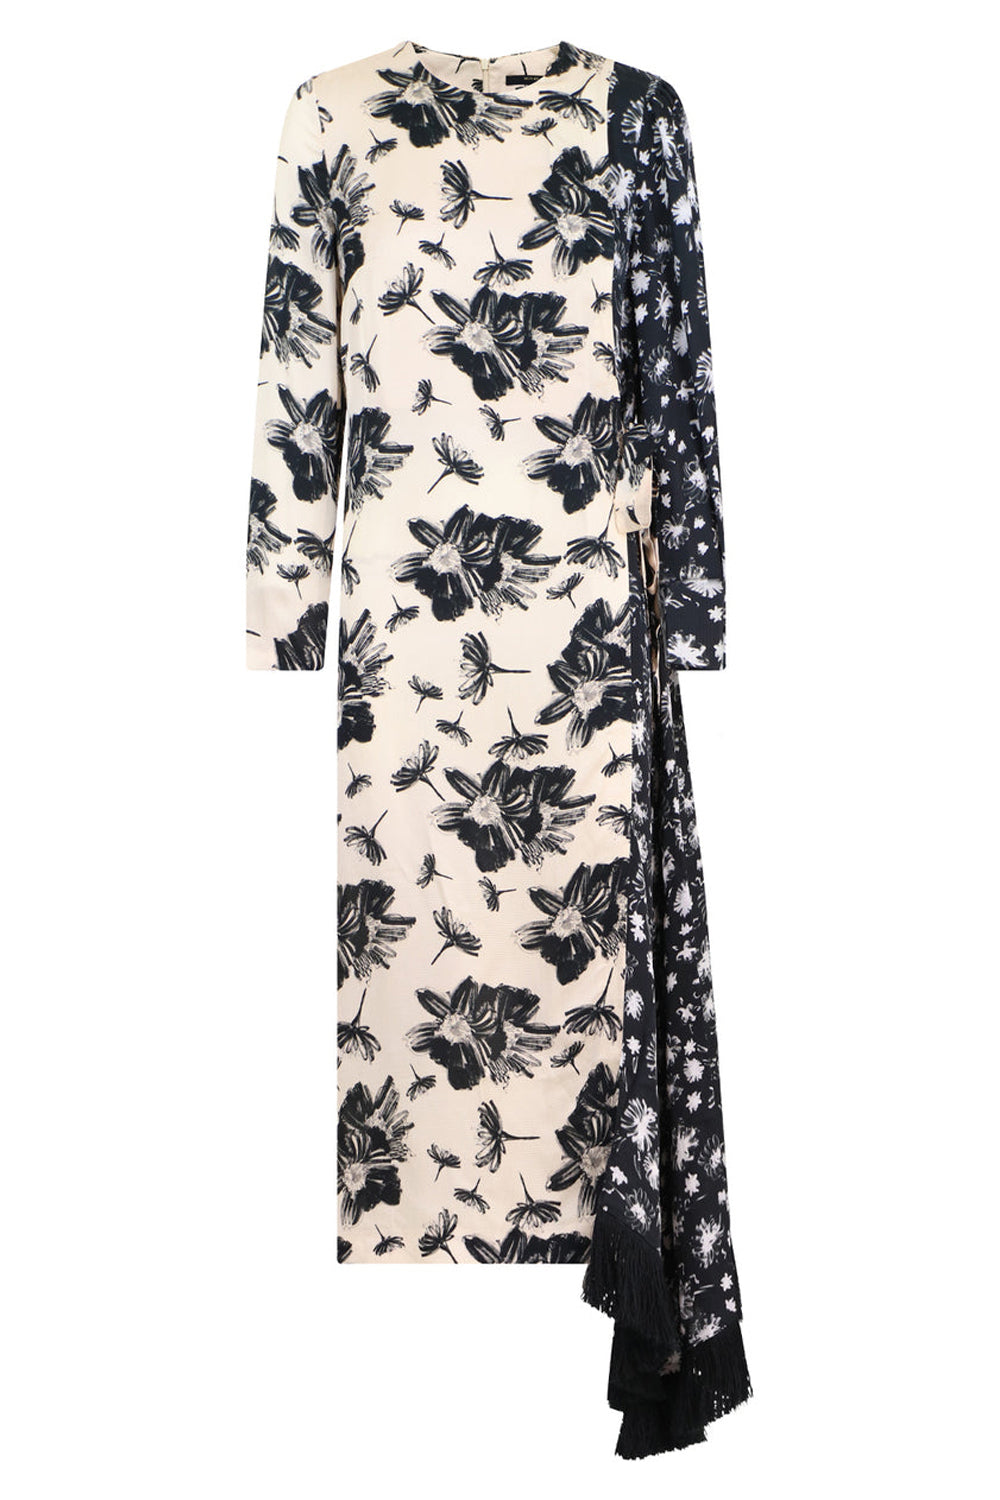 MOTHER OF PEARL RTW LOUISE FLORAL PRINT DRESS L/S BLACK/IVORY